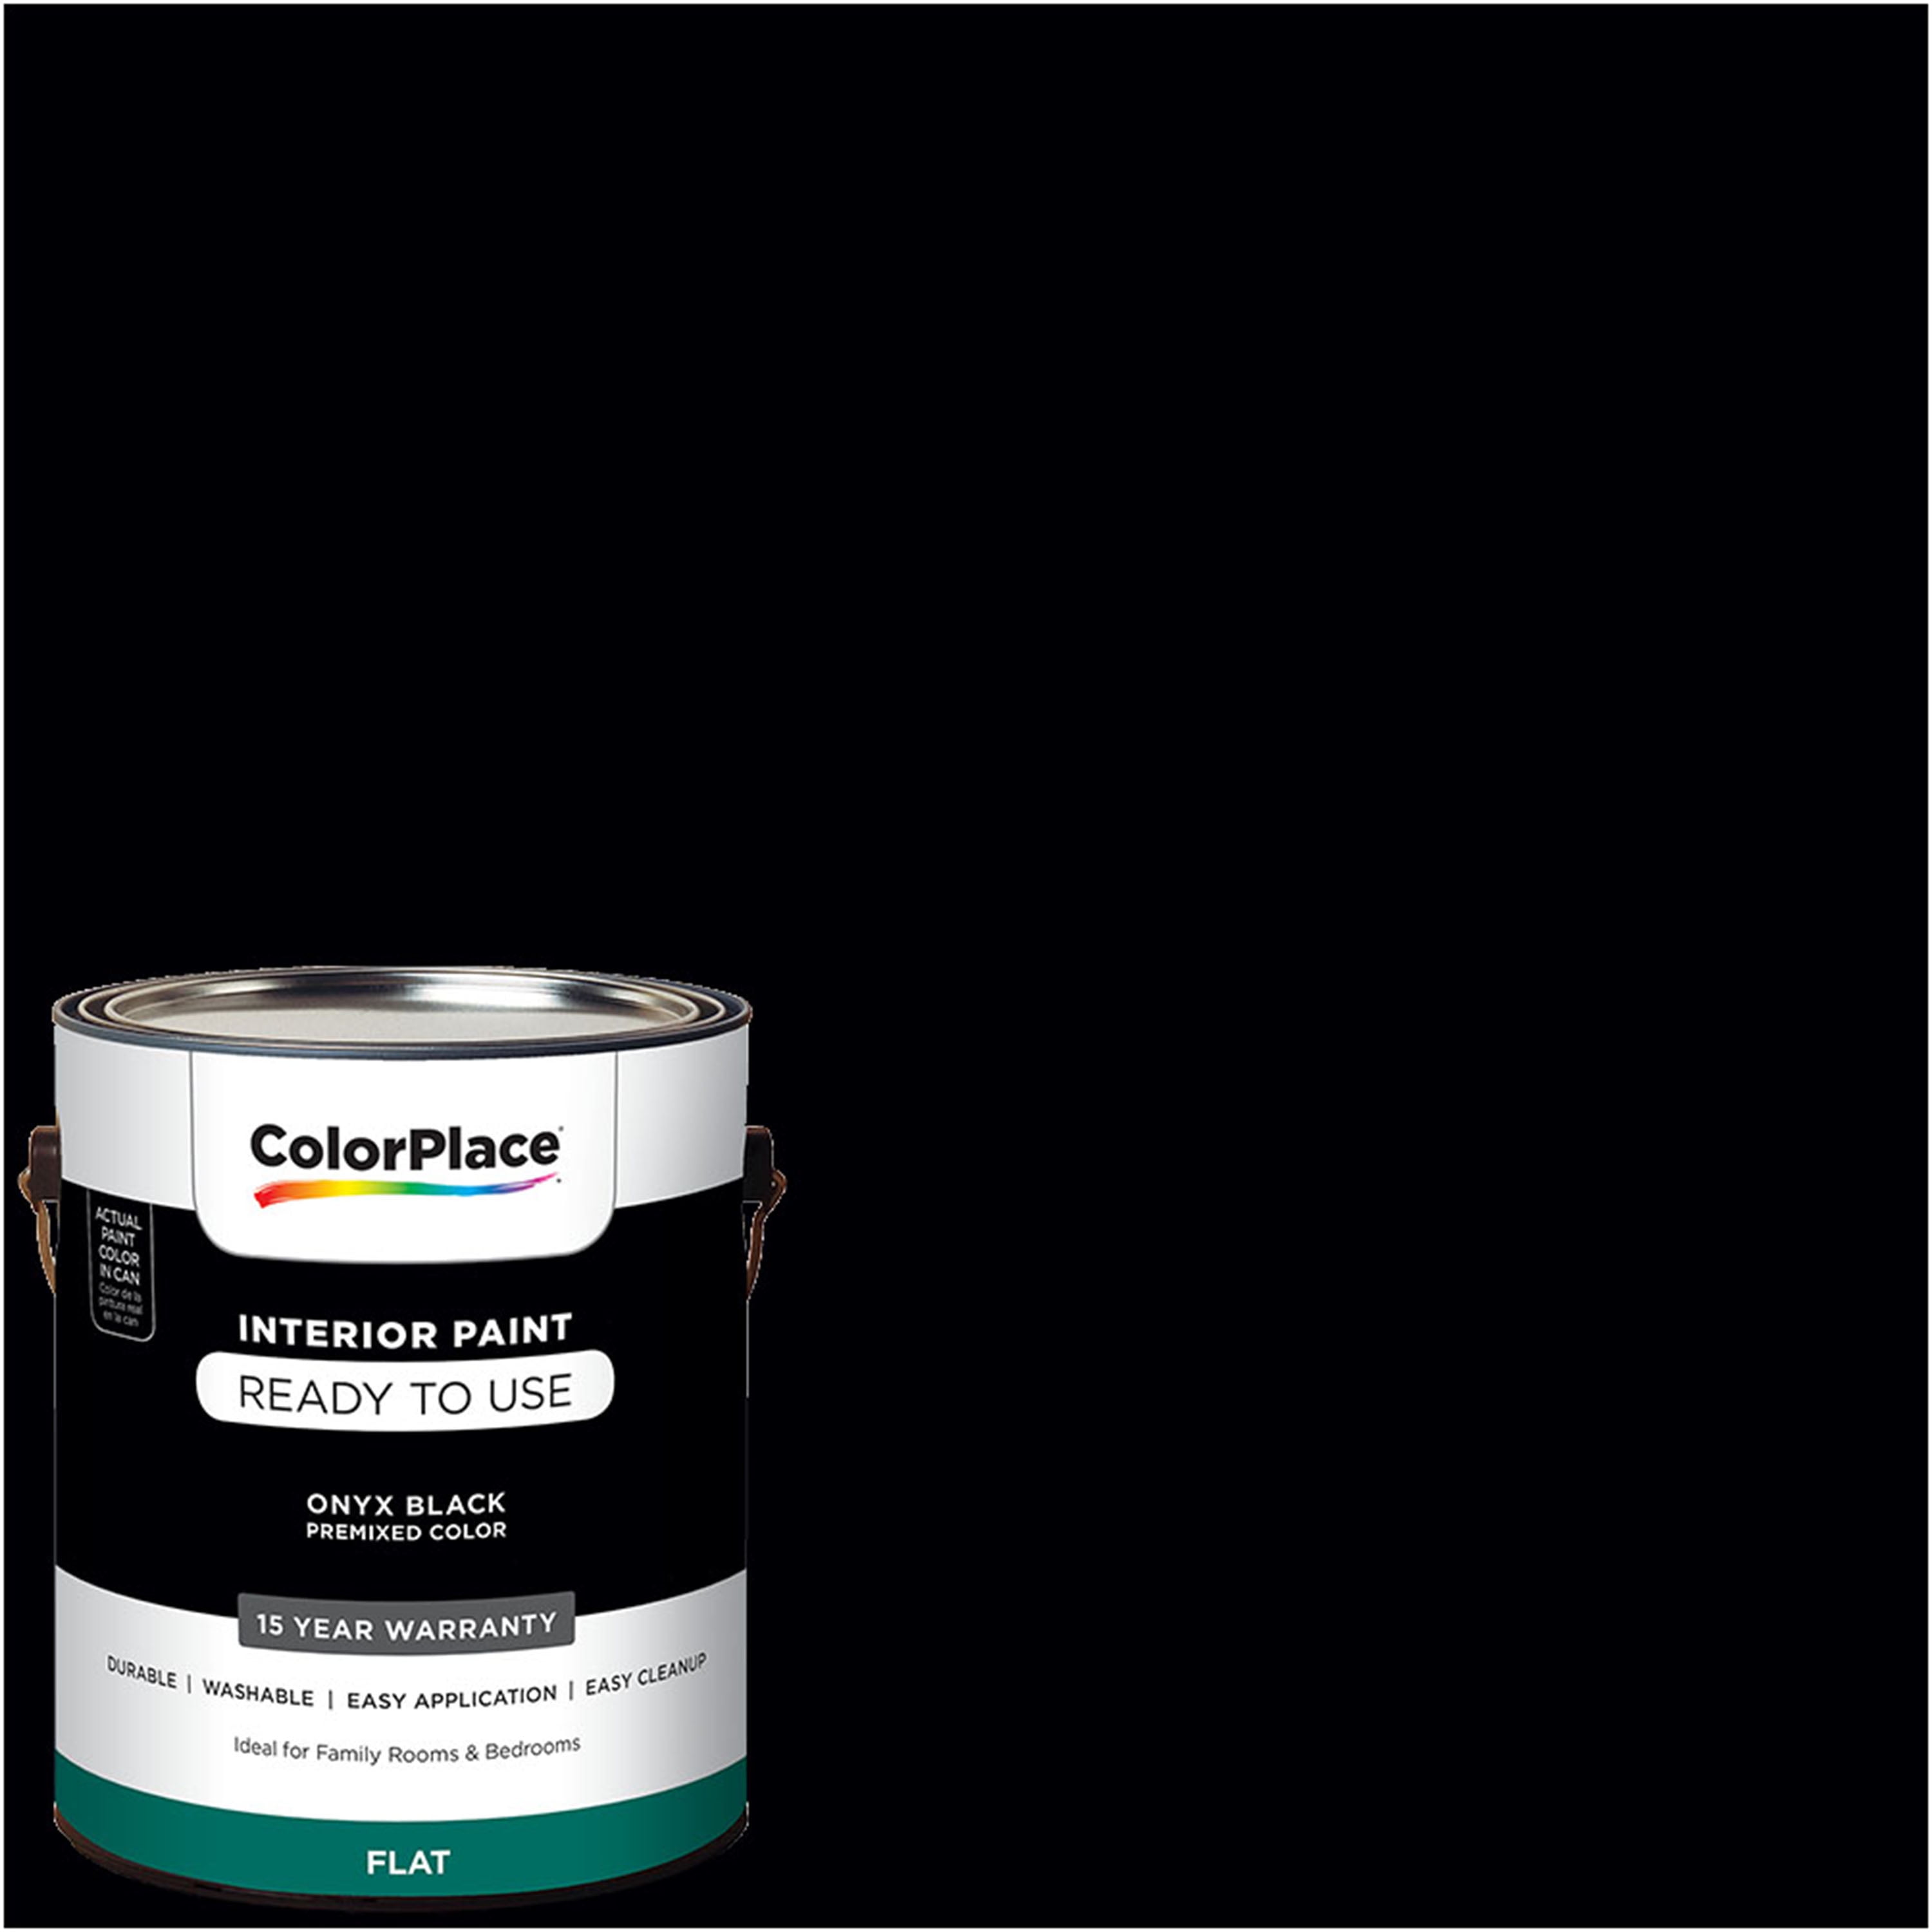 ColorPlace Ready to Use Interior Paint, Onyx Black, 1 Gallon, Flat